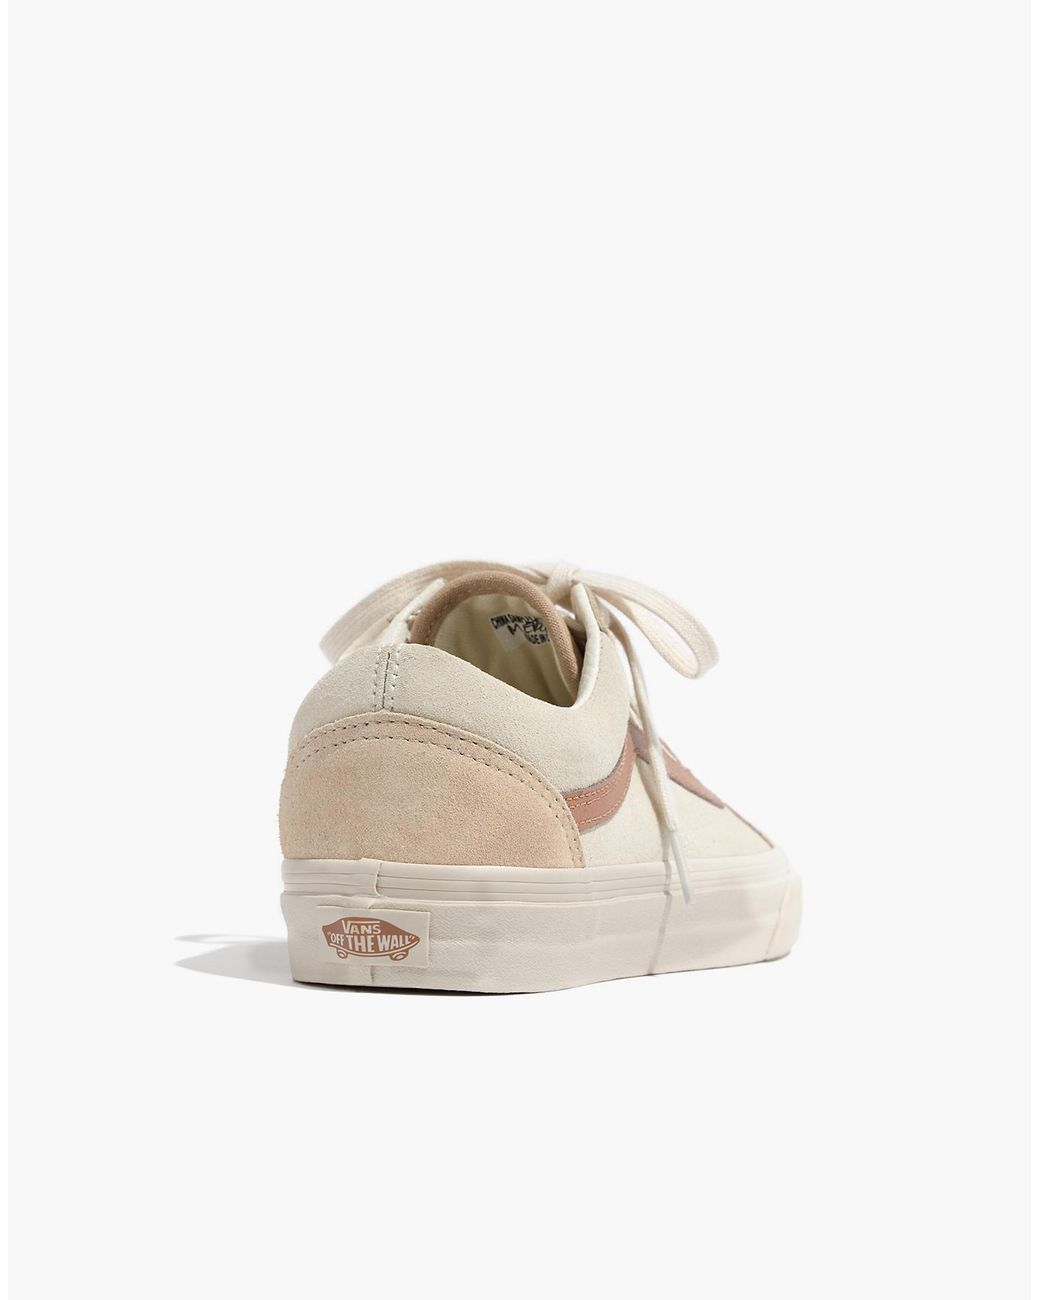 Madewell Suede X Vans® Unisex Old Skool Lace-up Sneakers In Camel Colorblock  in Natural | Lyst